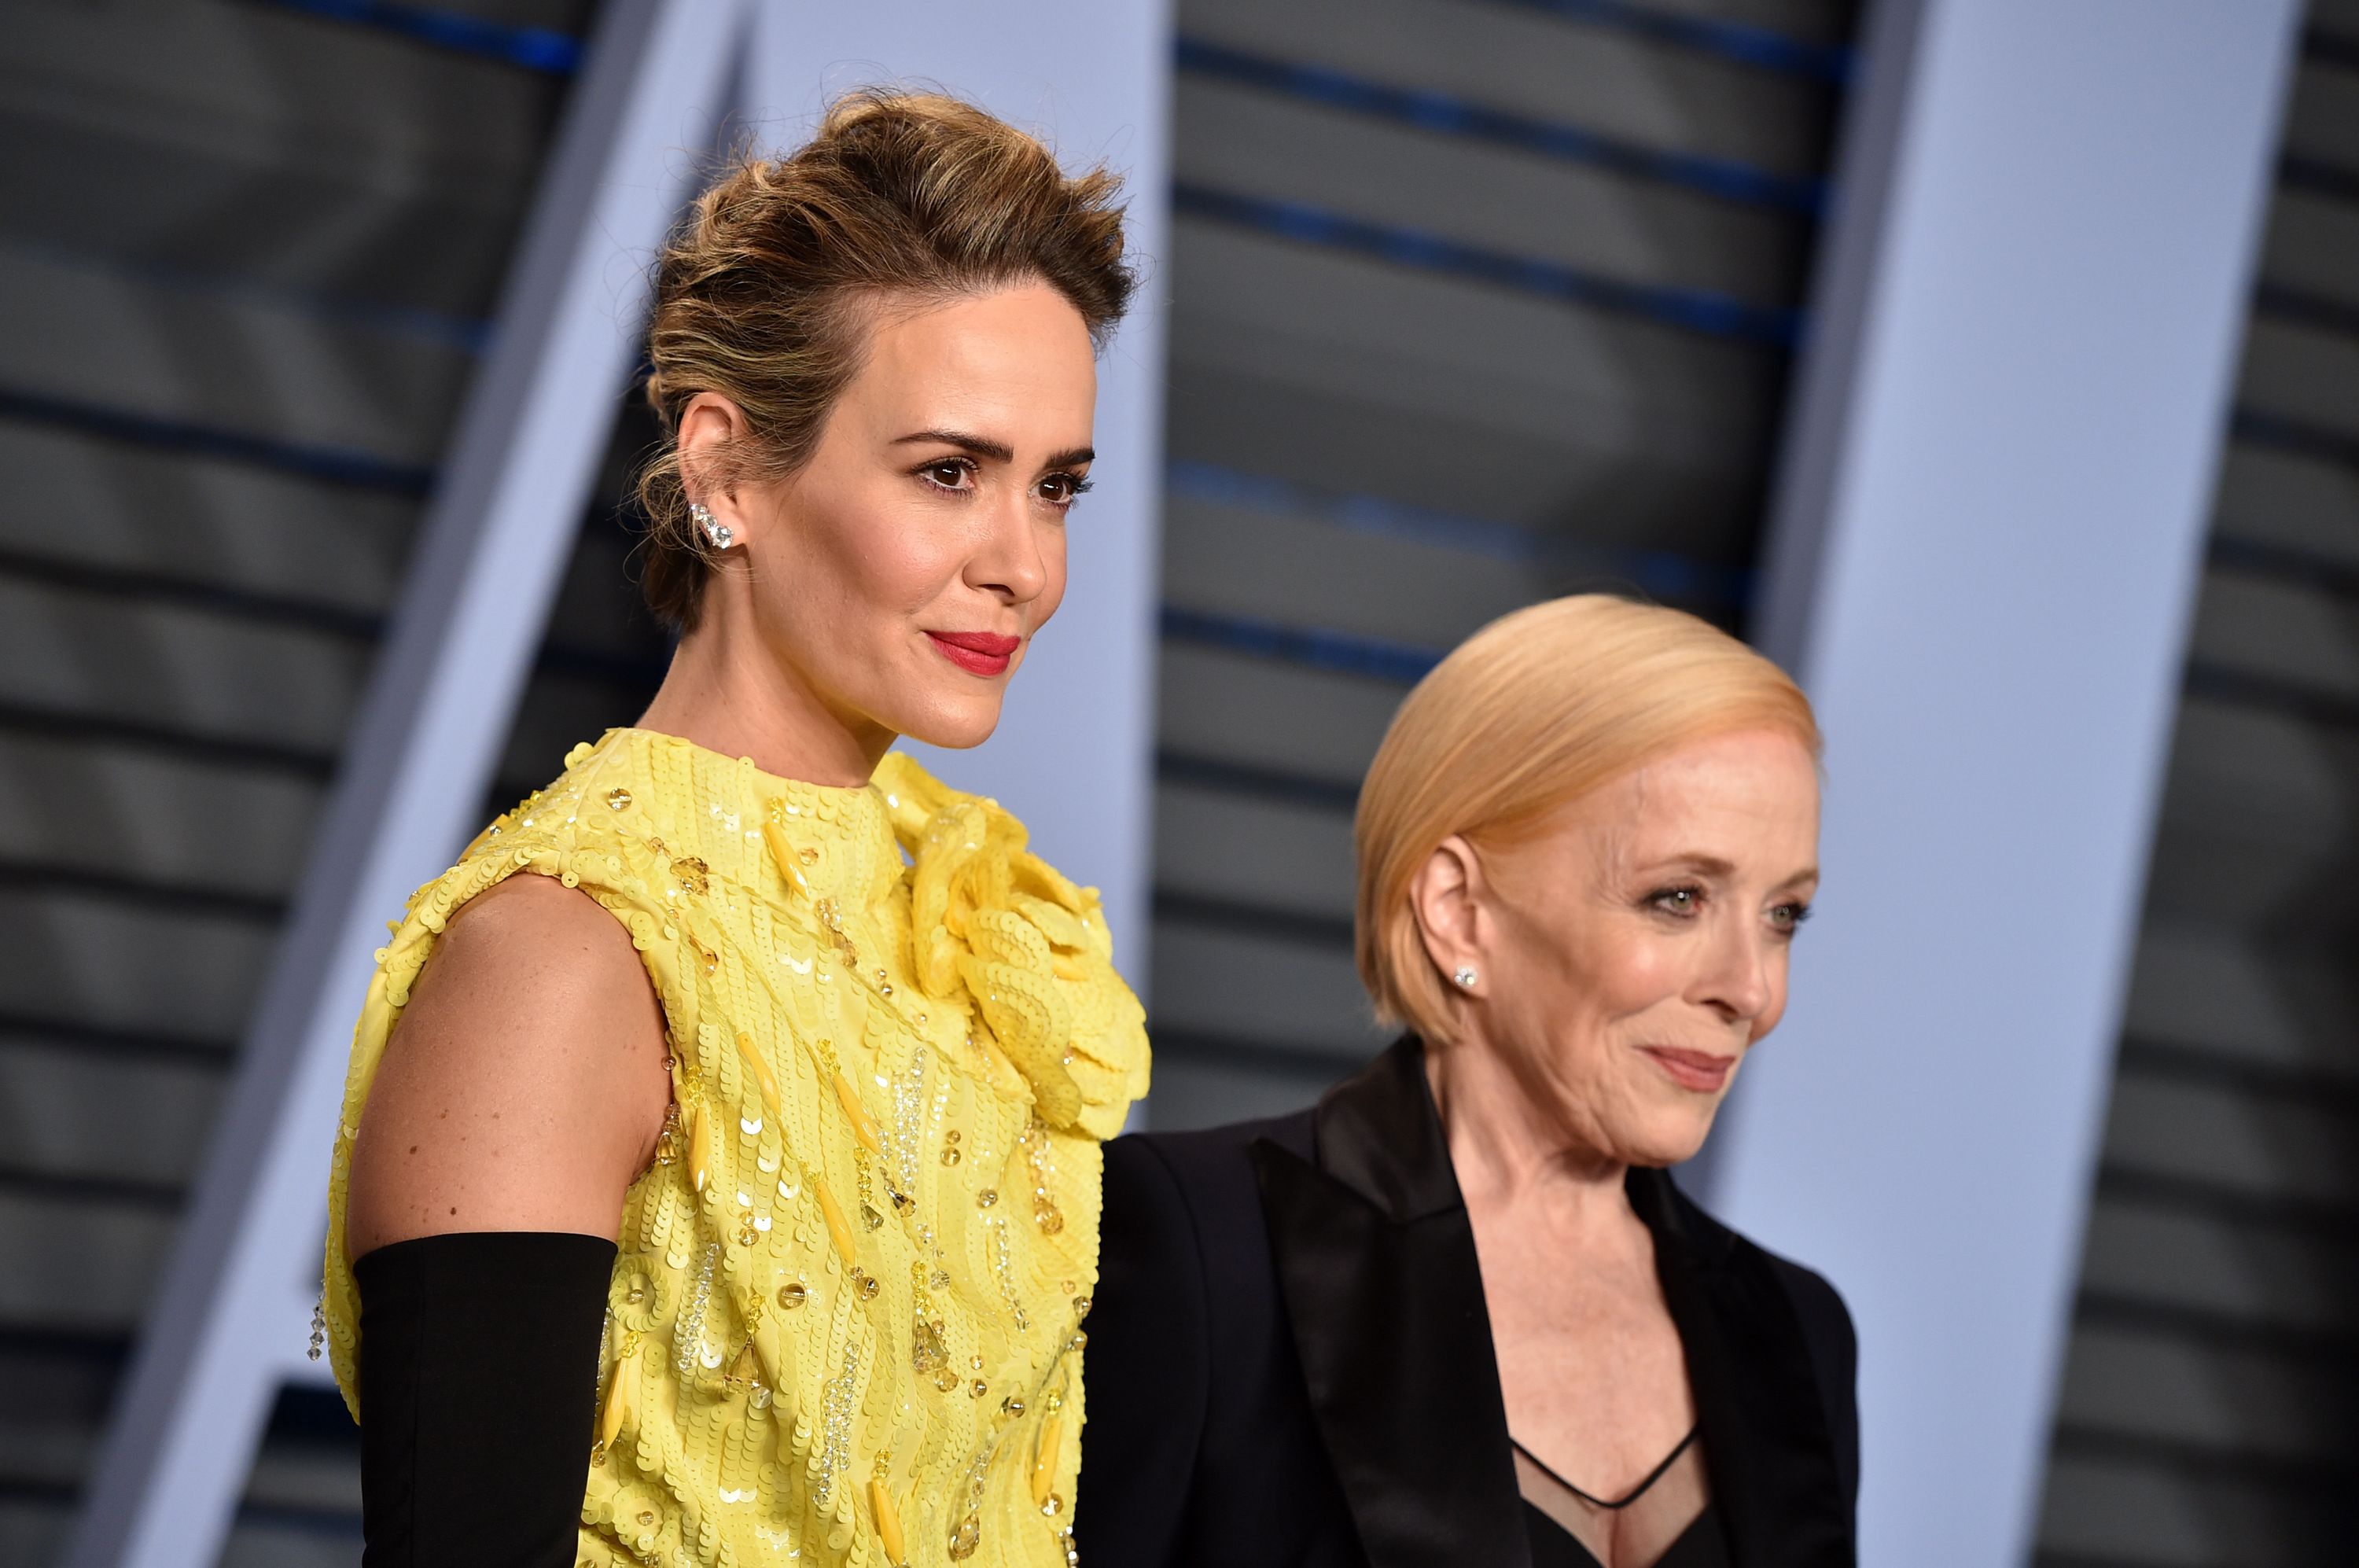 Sarah Paulson and Holland Taylor attend the 2018 Vanity Fair Oscar Party. | Source: Getty Images